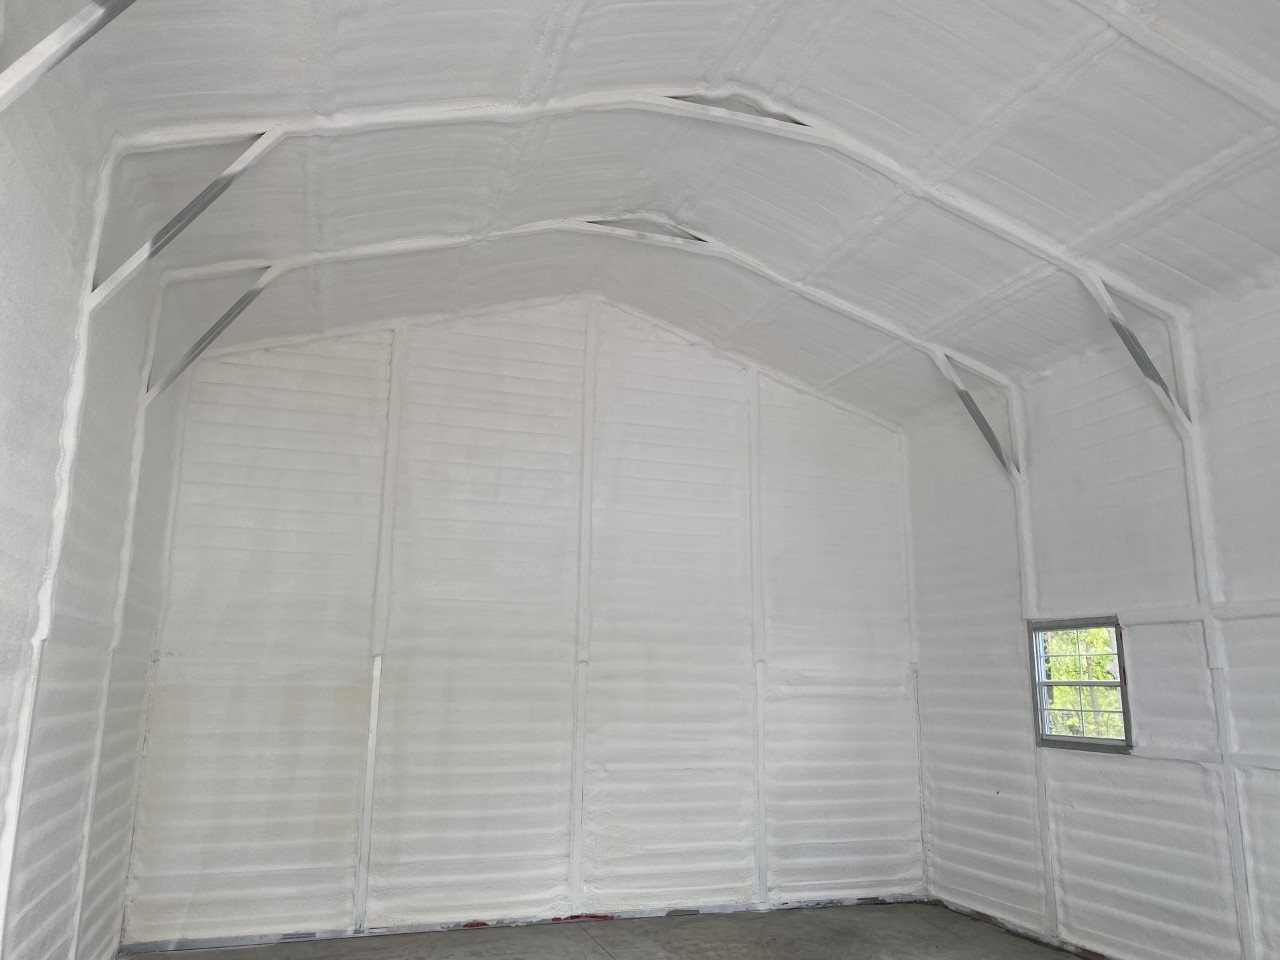 A metal building encapsulated in spray foam by insulation contractors at FoamTech.